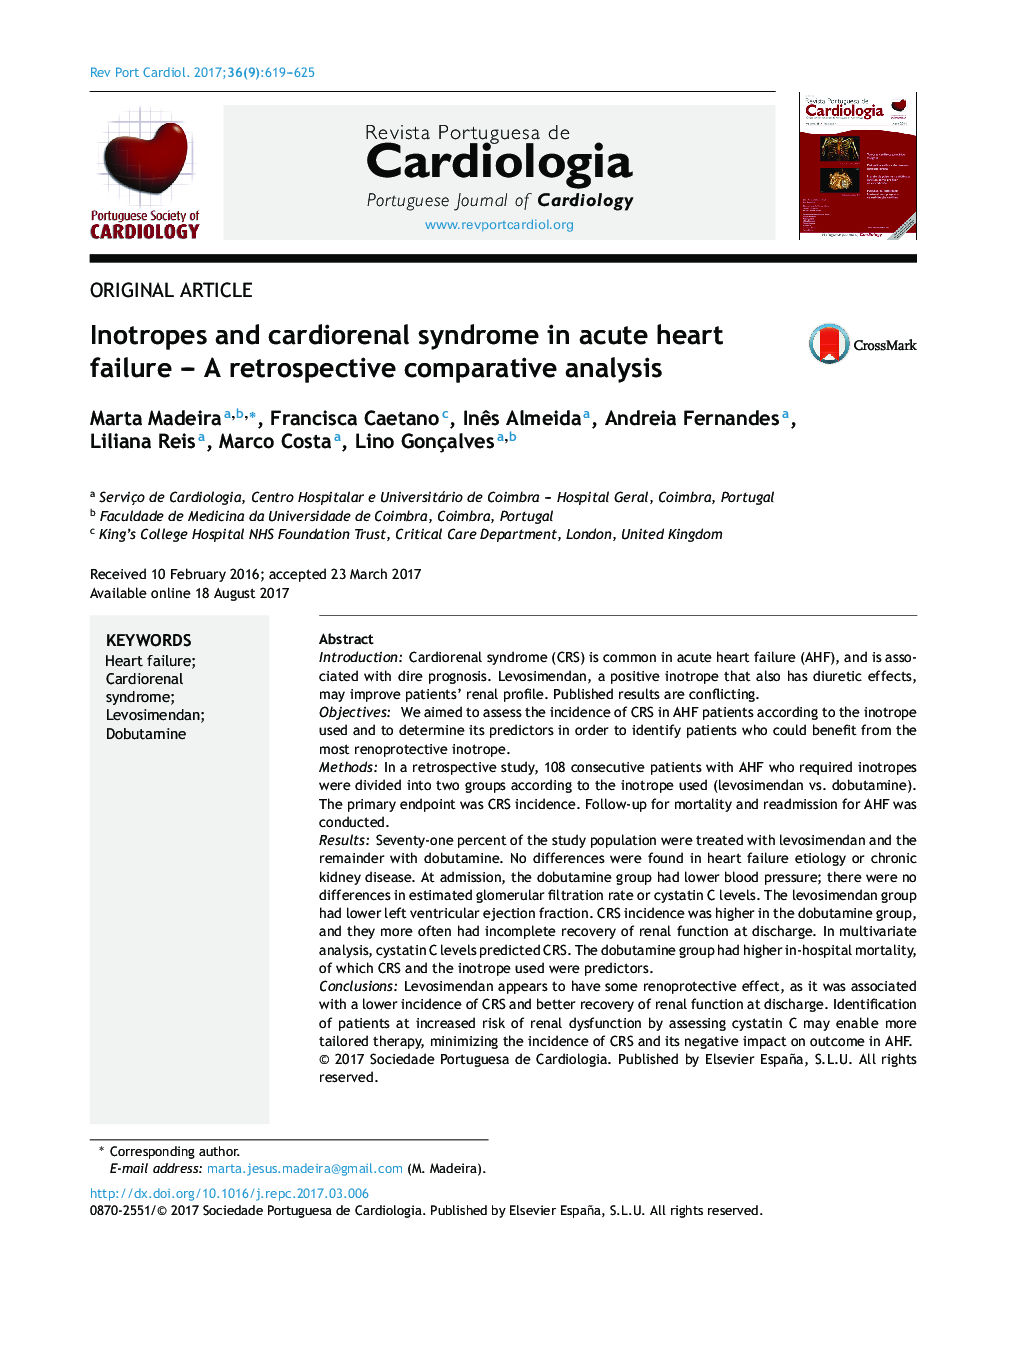 Inotropes and cardiorenal syndrome in acute heart failure - A retrospective comparative analysis